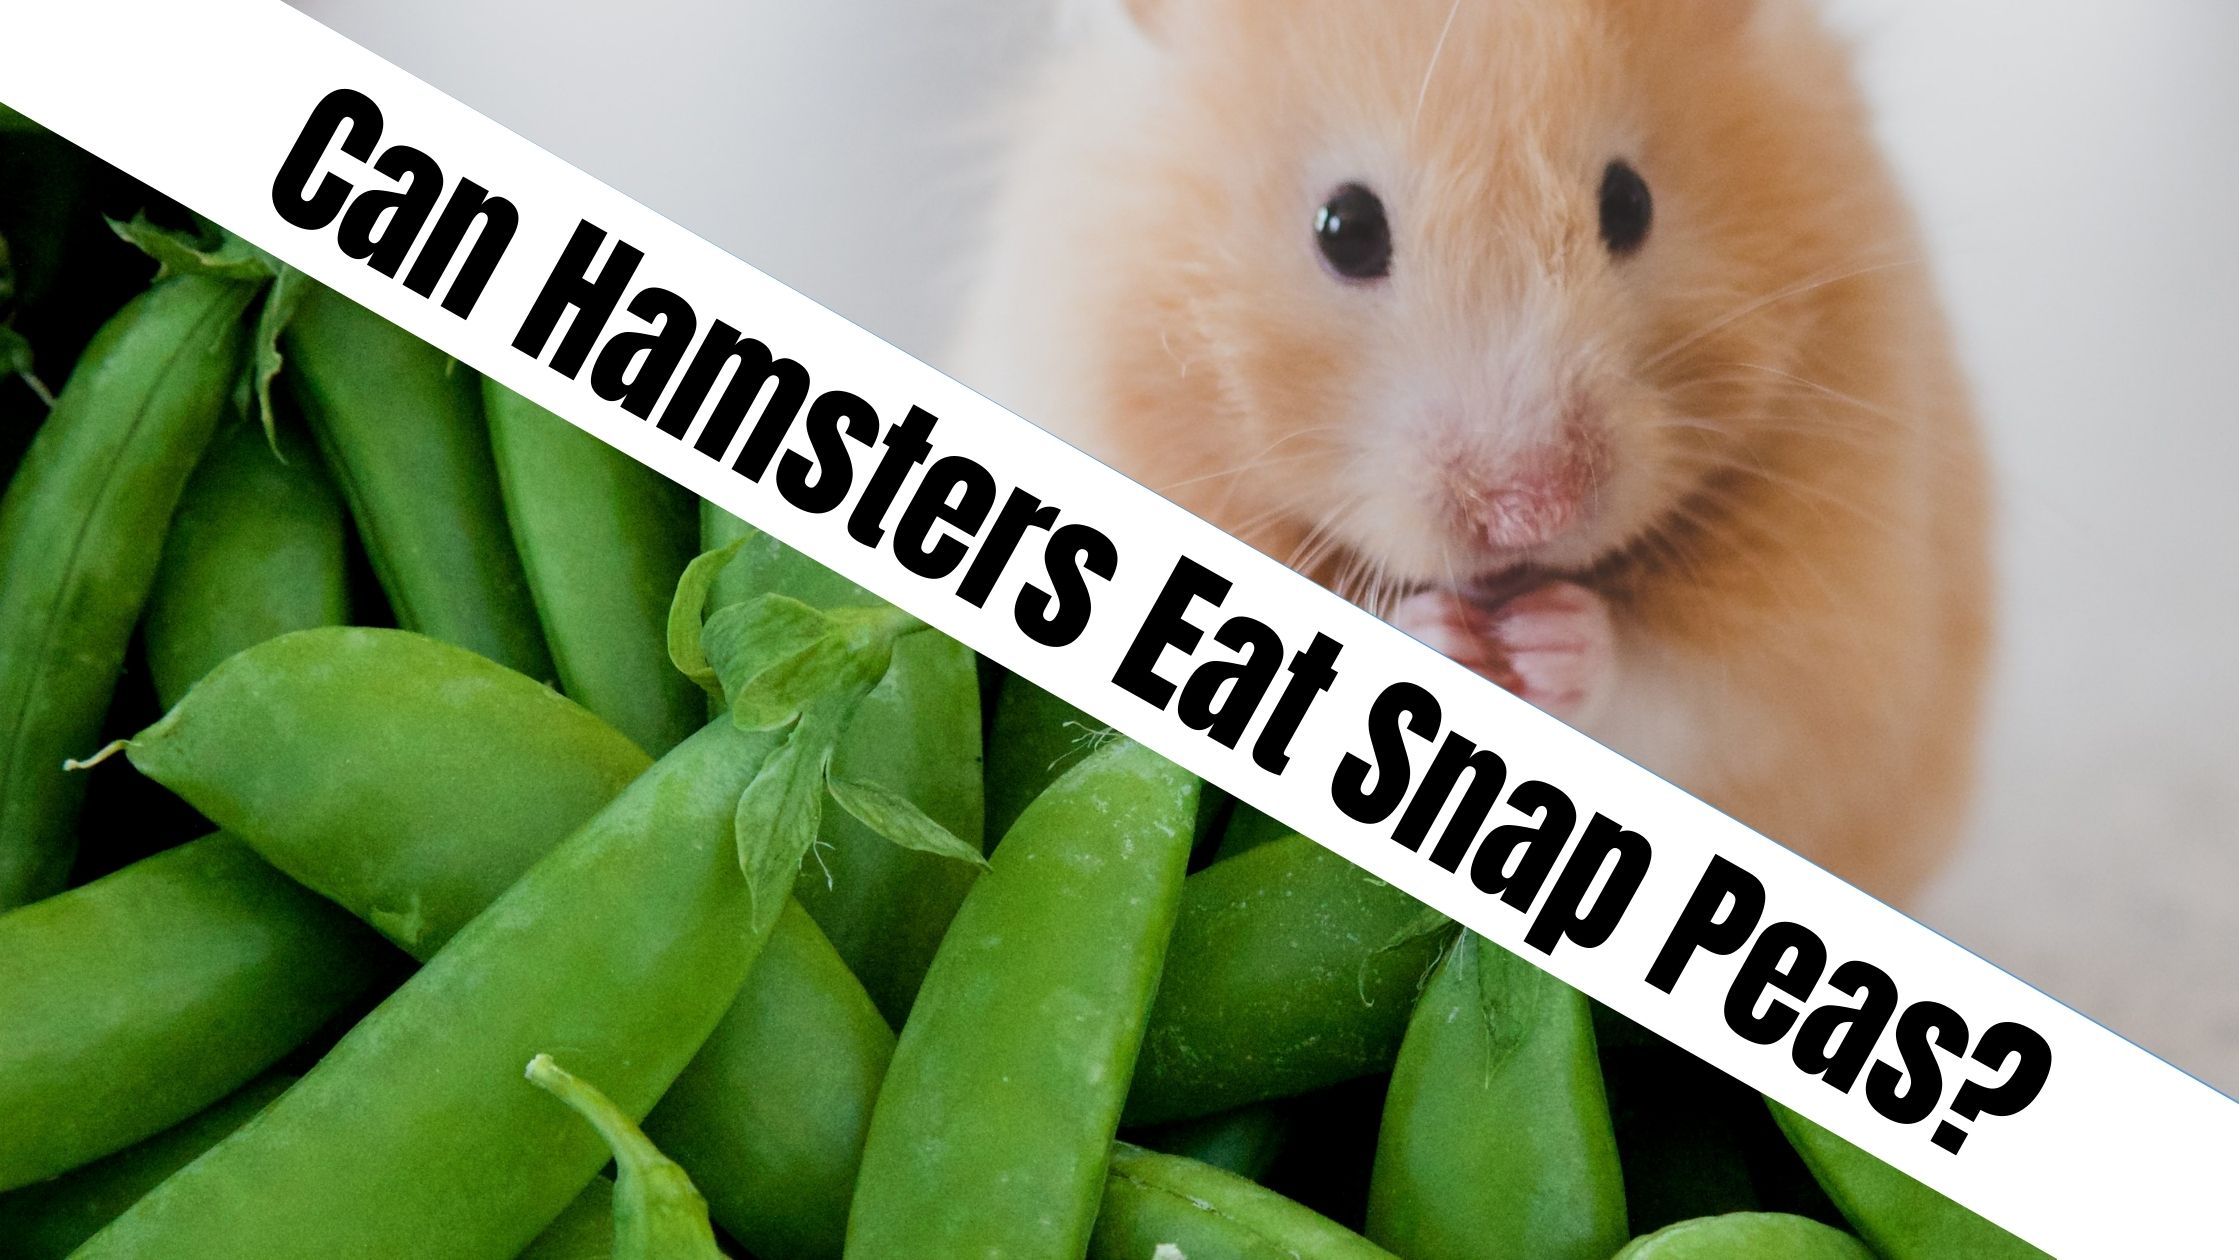 Can Hamsters Eat Snap Peas?